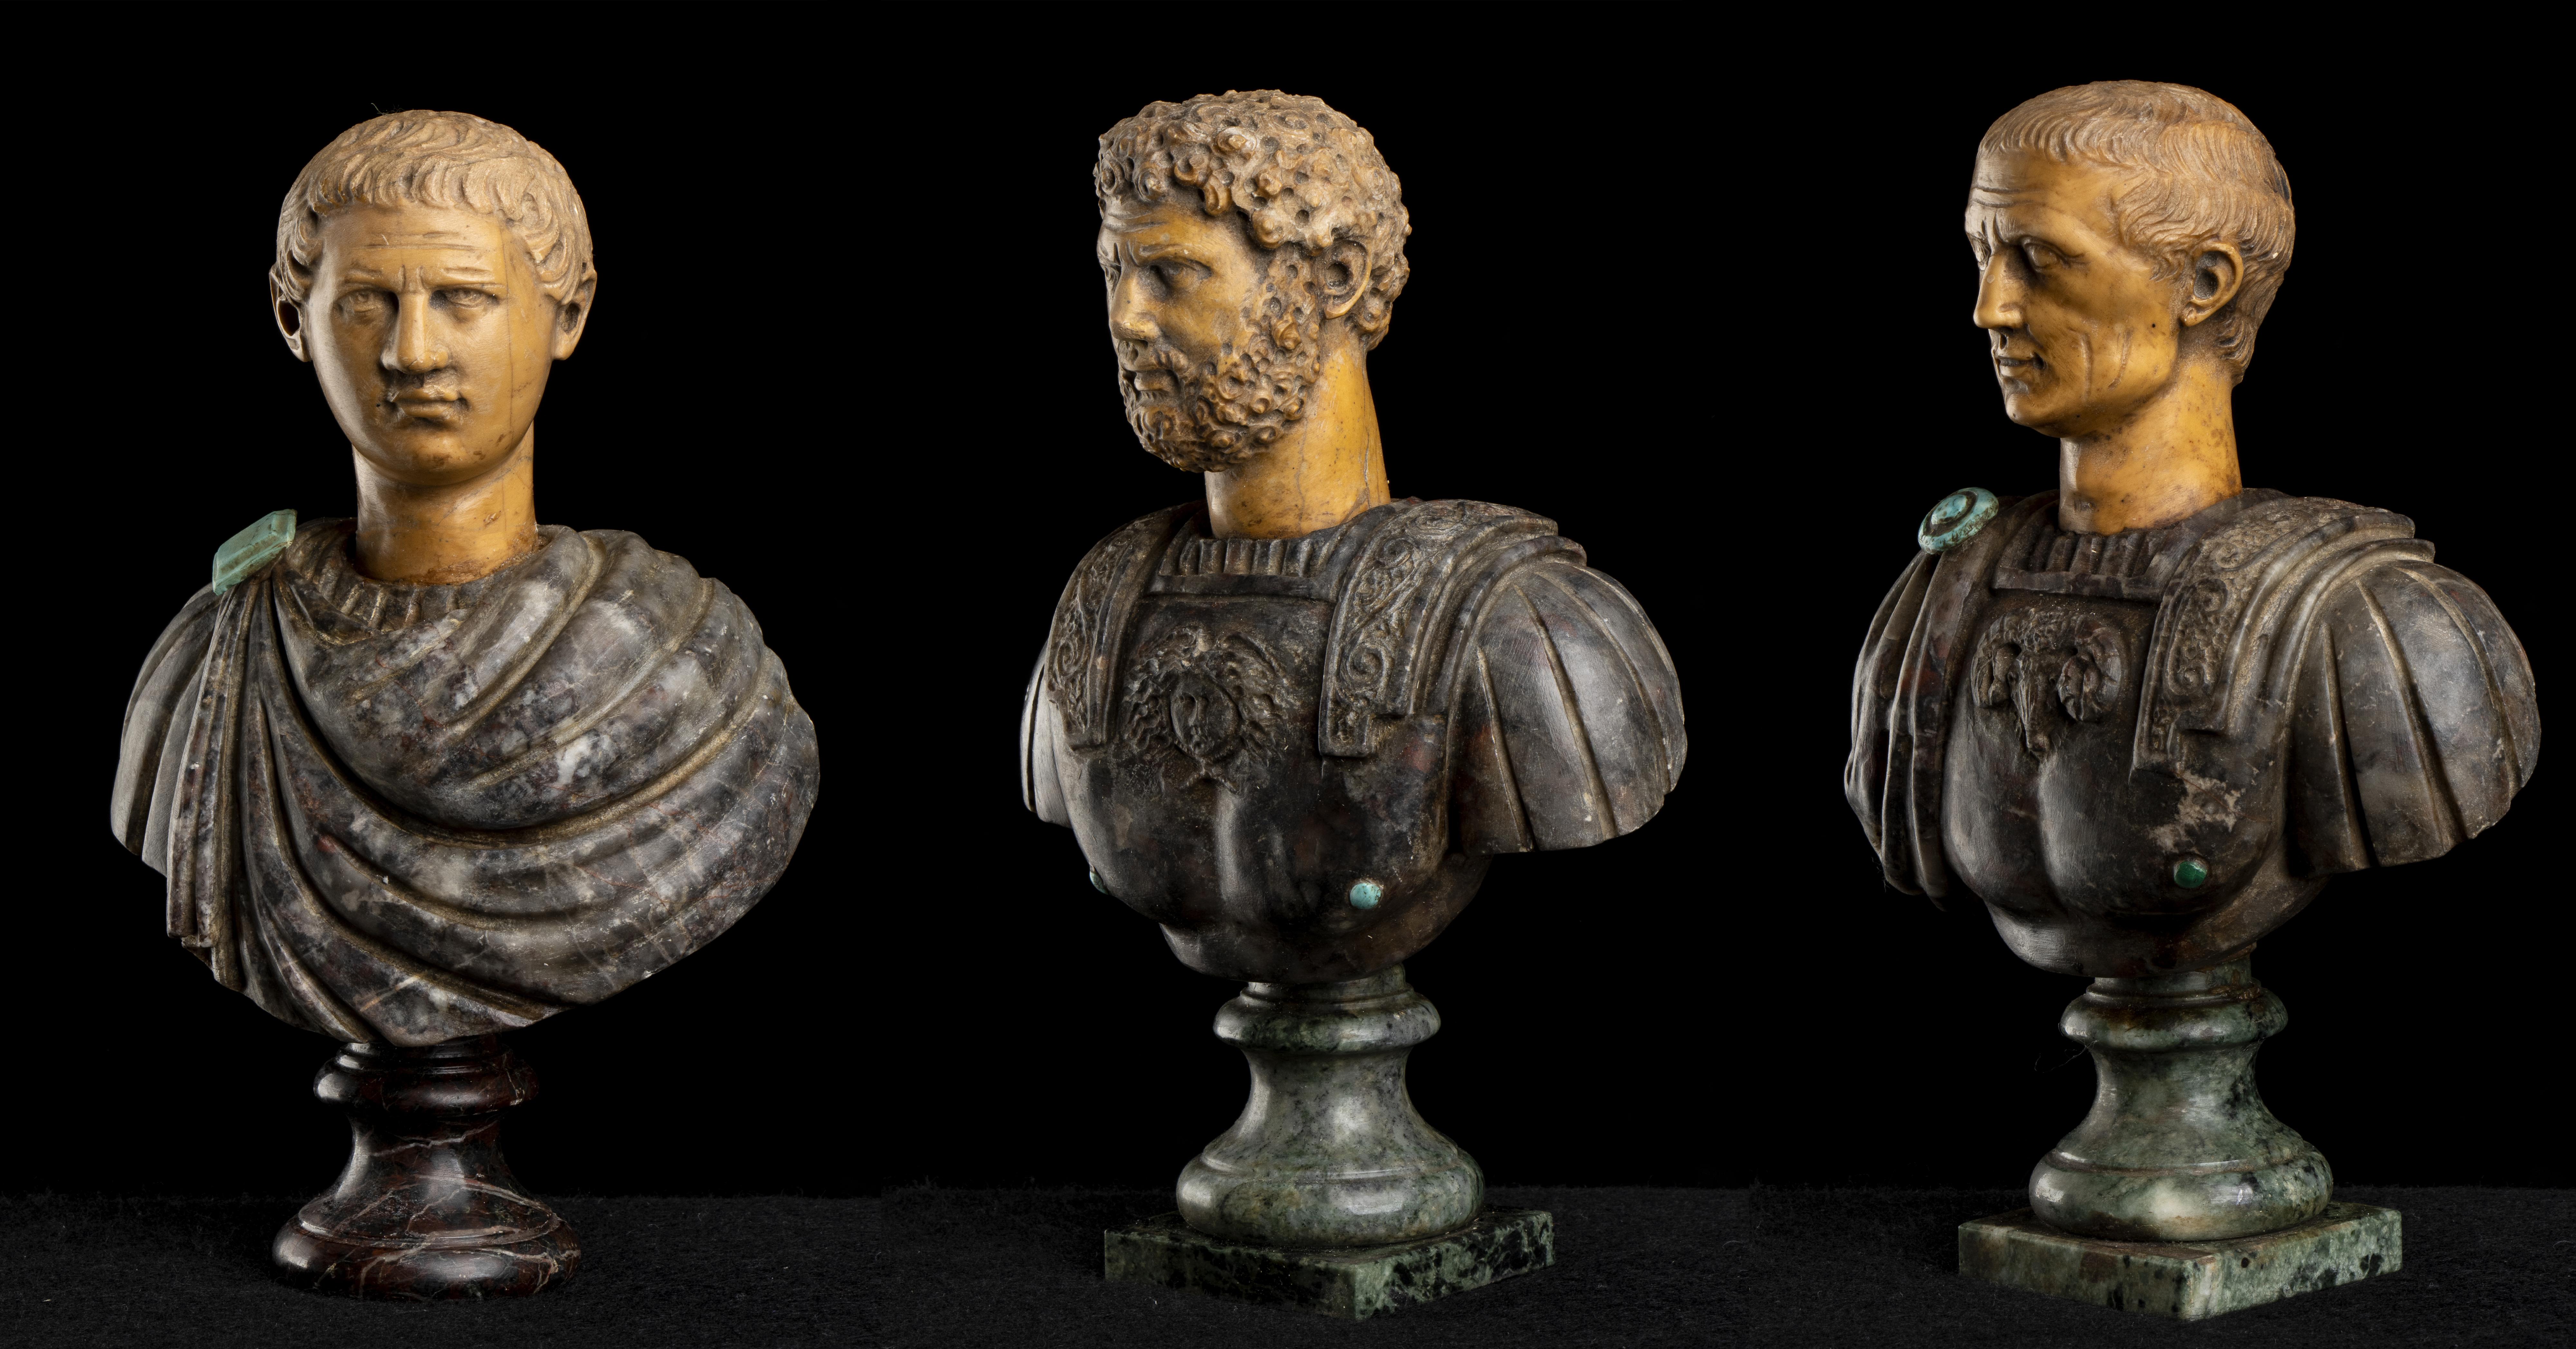 A Grand Tour Set of Three Polychrome Marble Busts Sculptures of Roman Emperors  2